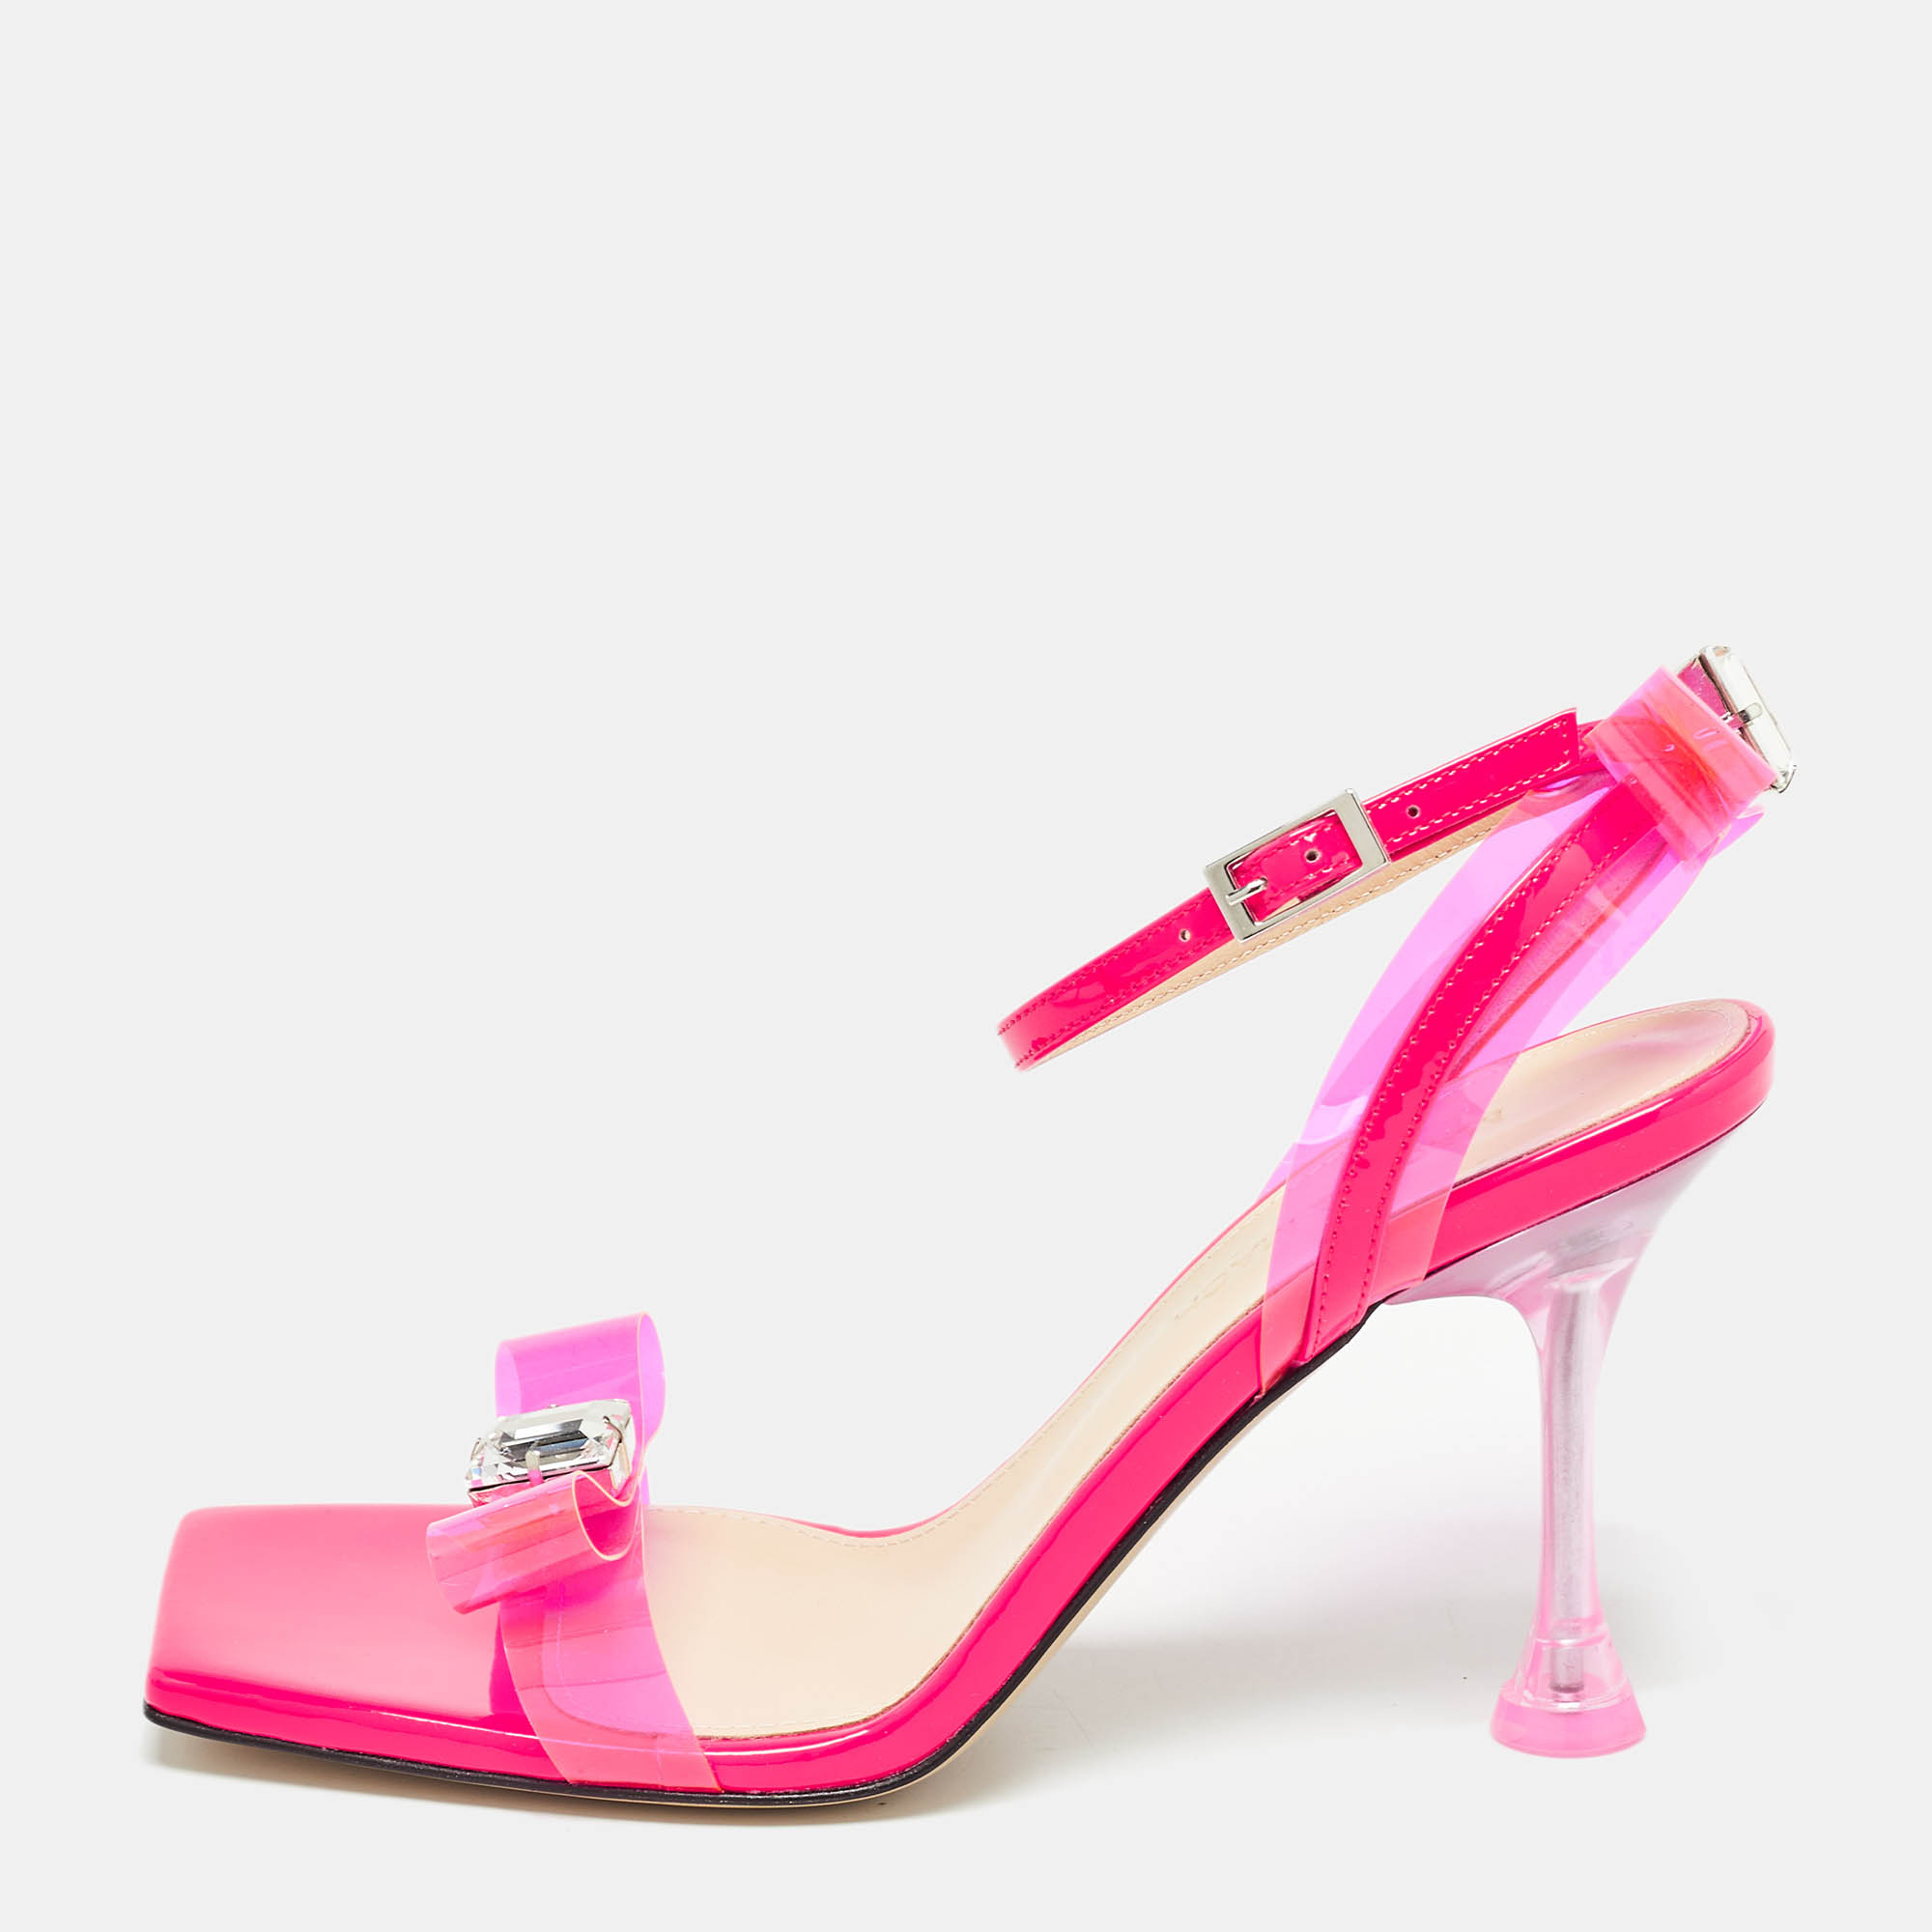 Mach & mach pink pvc and patent french bow square toe sandals size 37.5